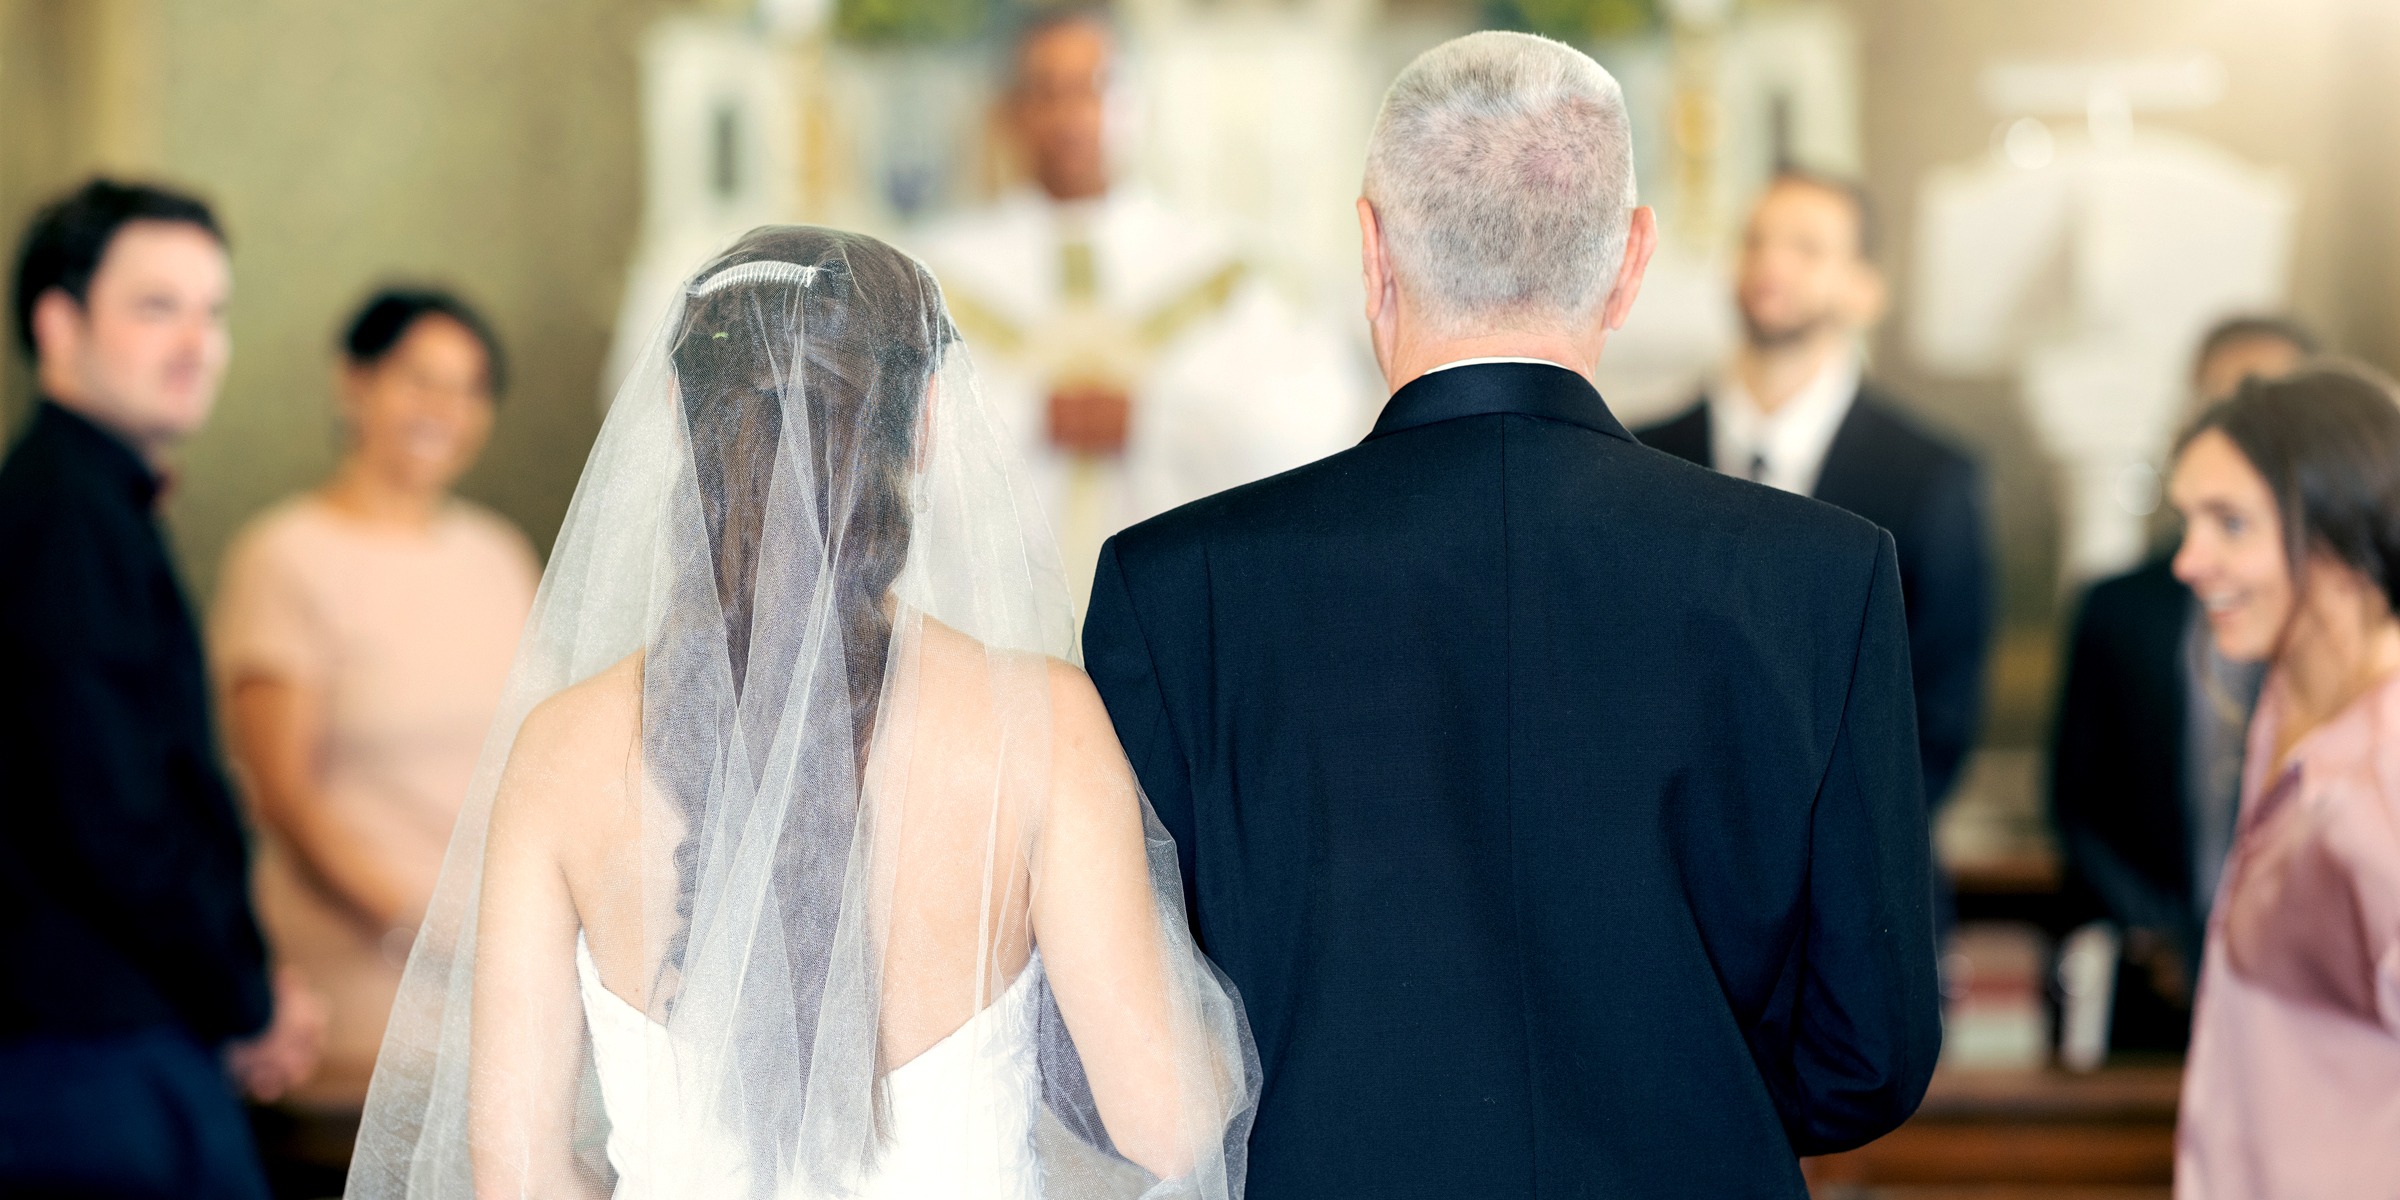 Father walks his daughter down the aisle | Source: Shutterstock